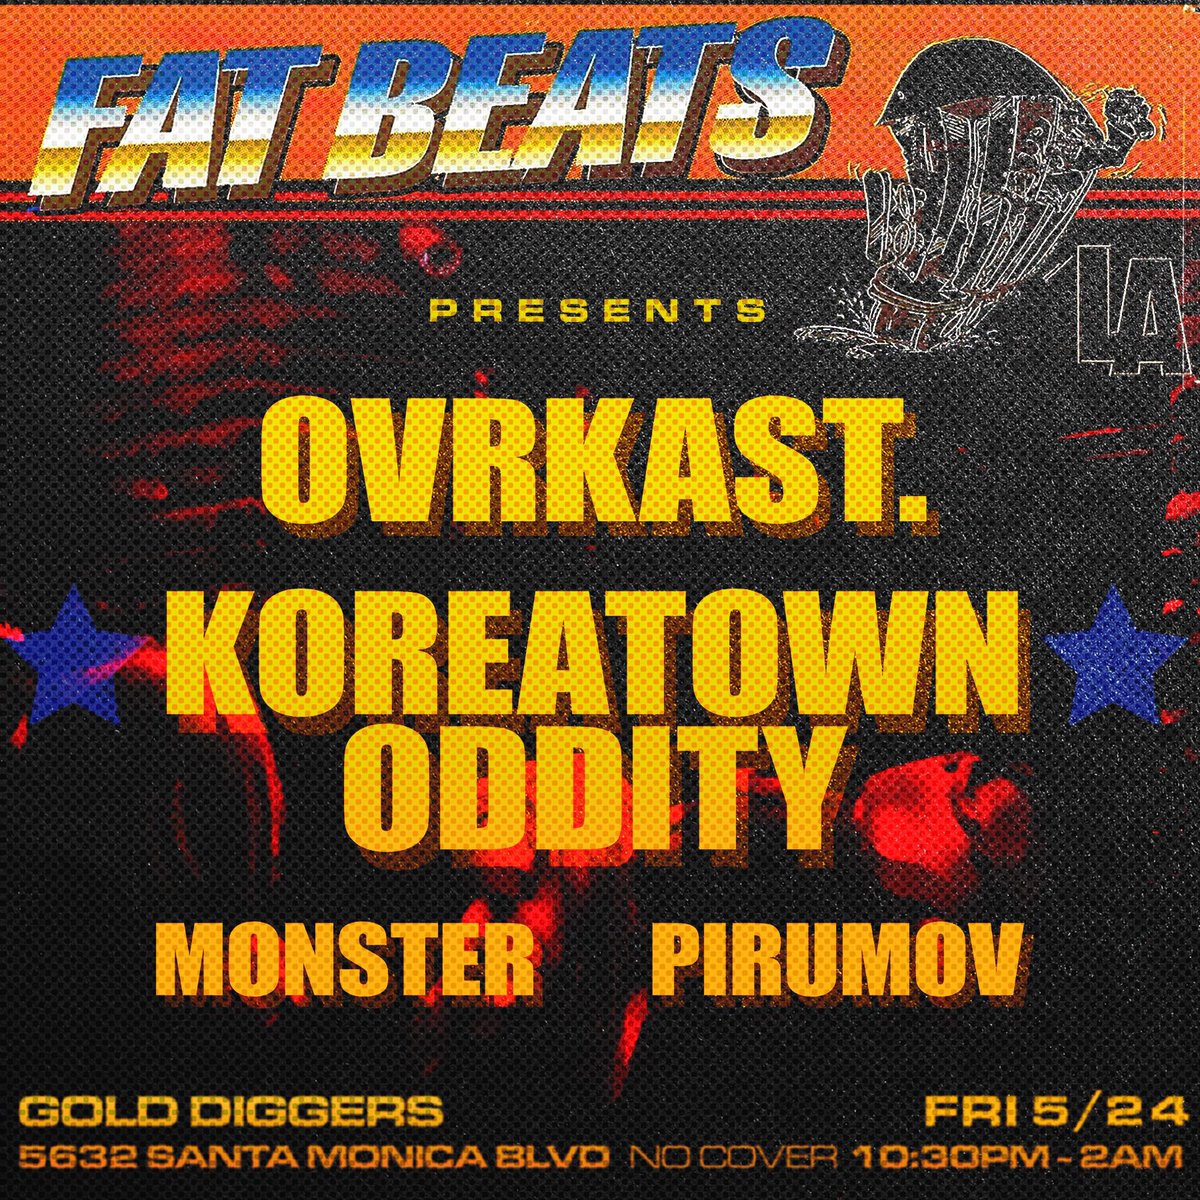 Join us Friday for the second installment of #fatbeats presents with @ovrkast and @KoreatownOddity spinning  special guest DJ sets. 

RSVP: link.dice.fm/fbnZWSVSHJb?sh…